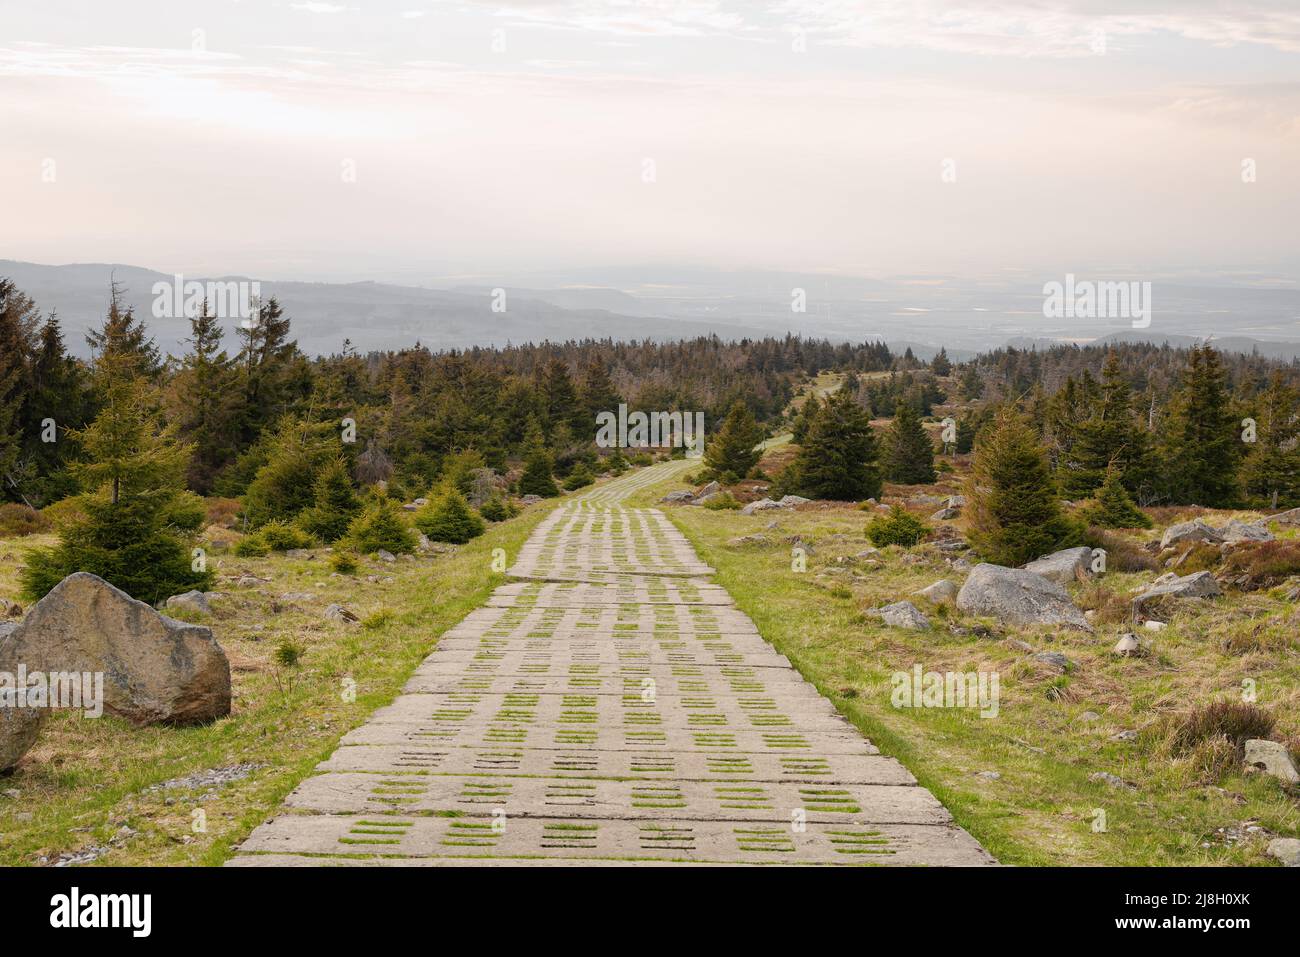 Mount Brocken in the Harz National Park, Saxony-Anhalt, Germany. Typical hiking trail landscape. Stock Photo